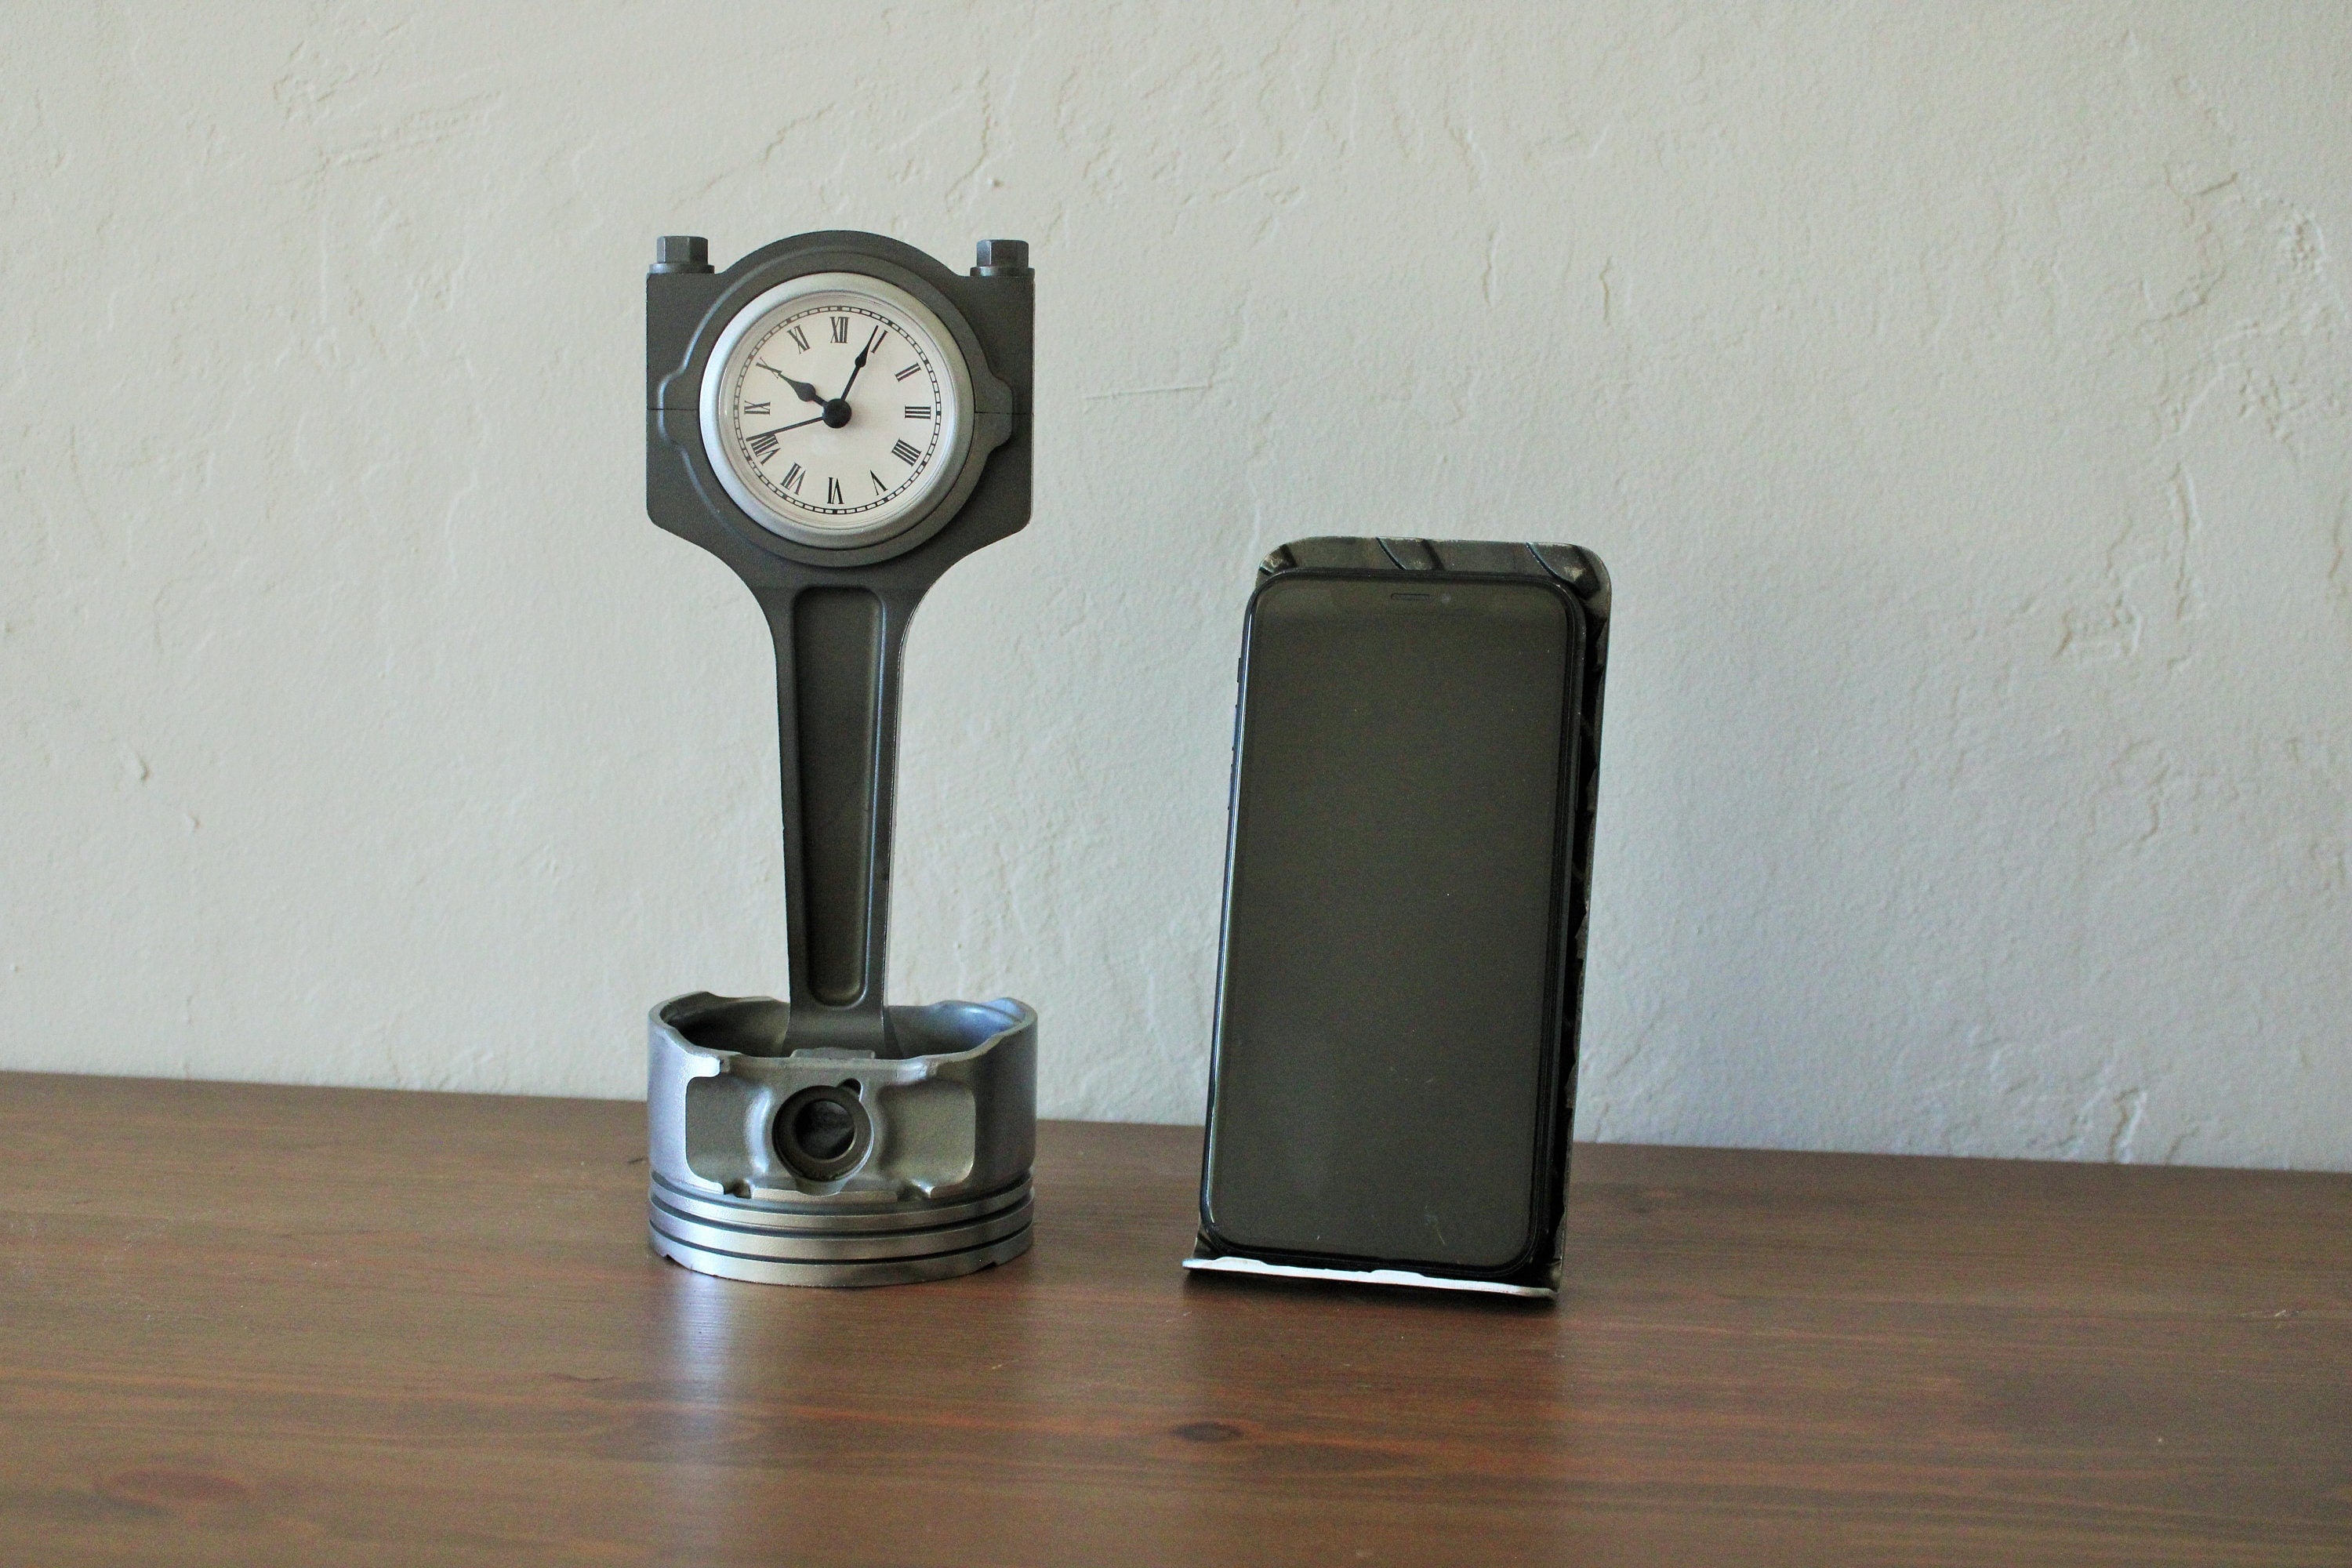 A piston clock made out of a Jaguar car's piston finished in gunmetal gray next to an iPhone on a stand.